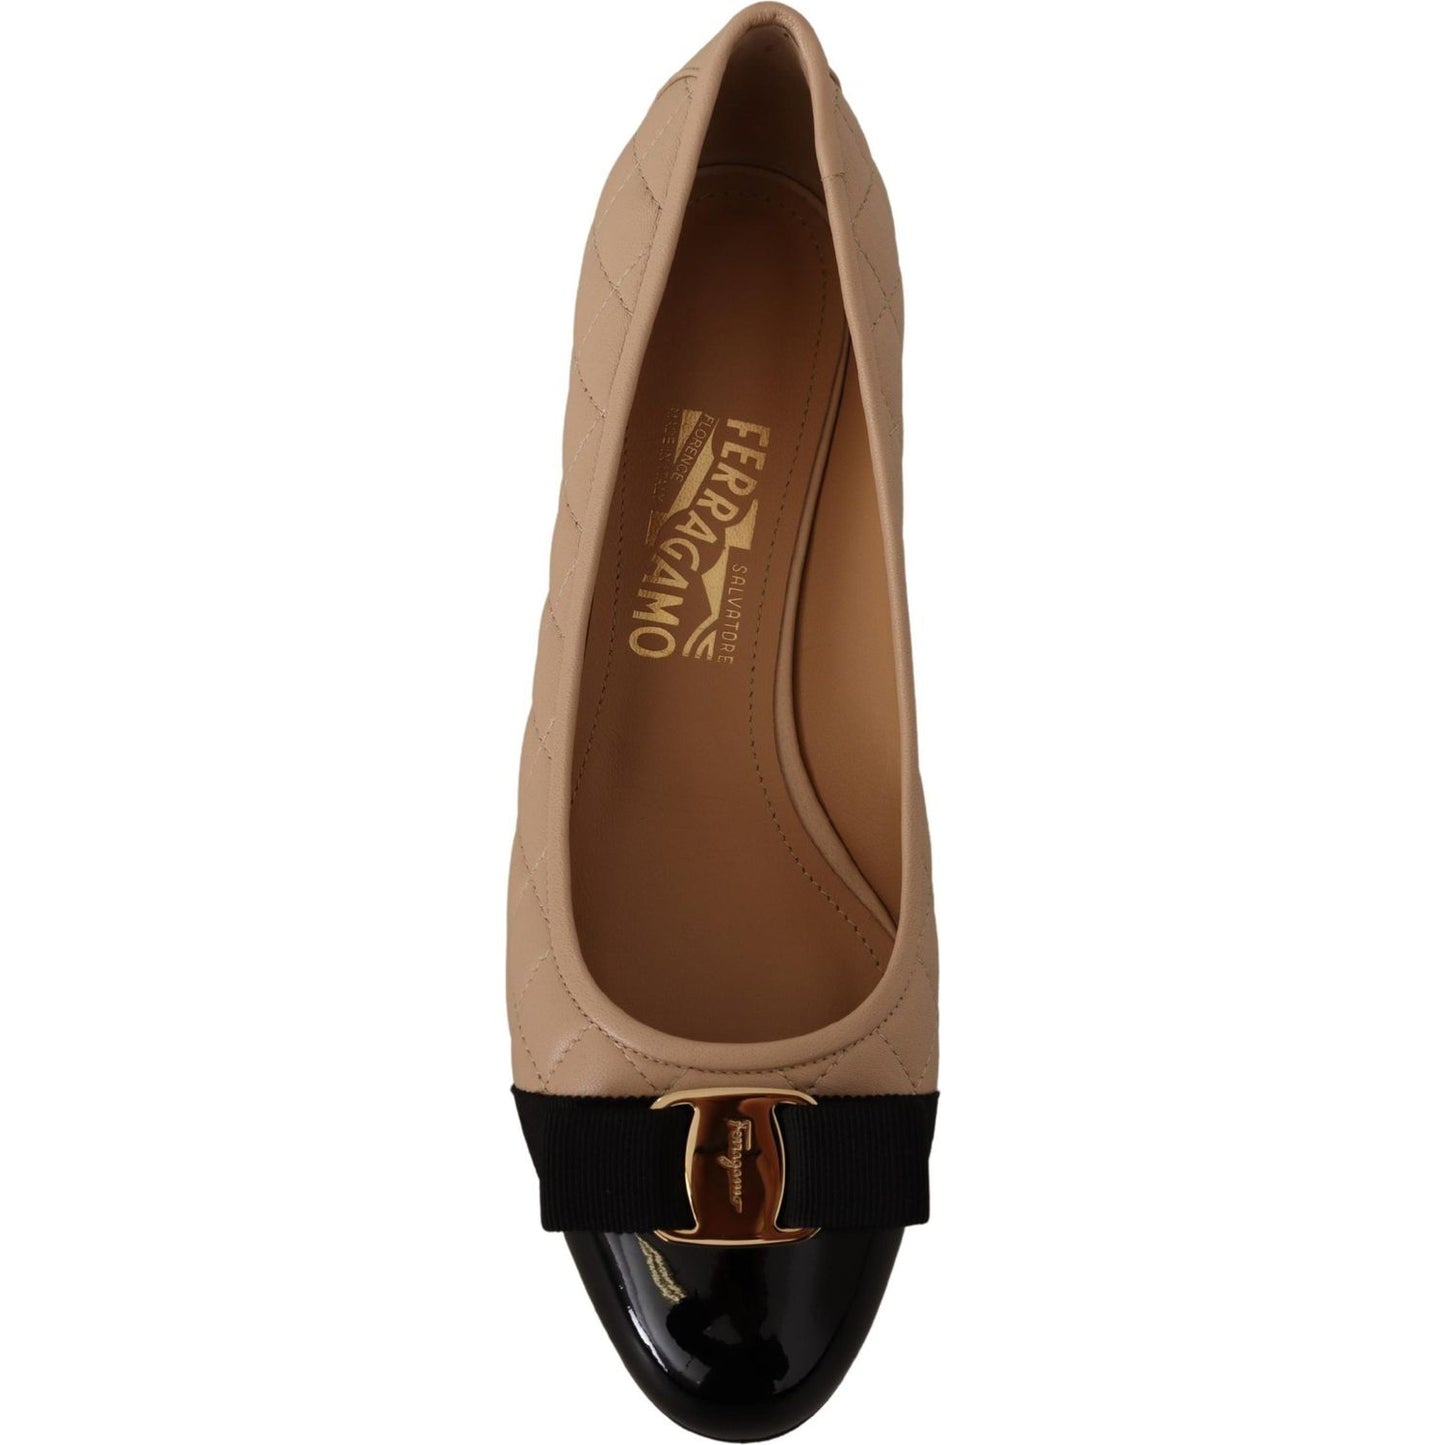 Salvatore Ferragamo Elegant Quilted Leather Pumps in Beige and Black WOMAN PUMPS beige-and-black-nappa-leather-pumps-shoes